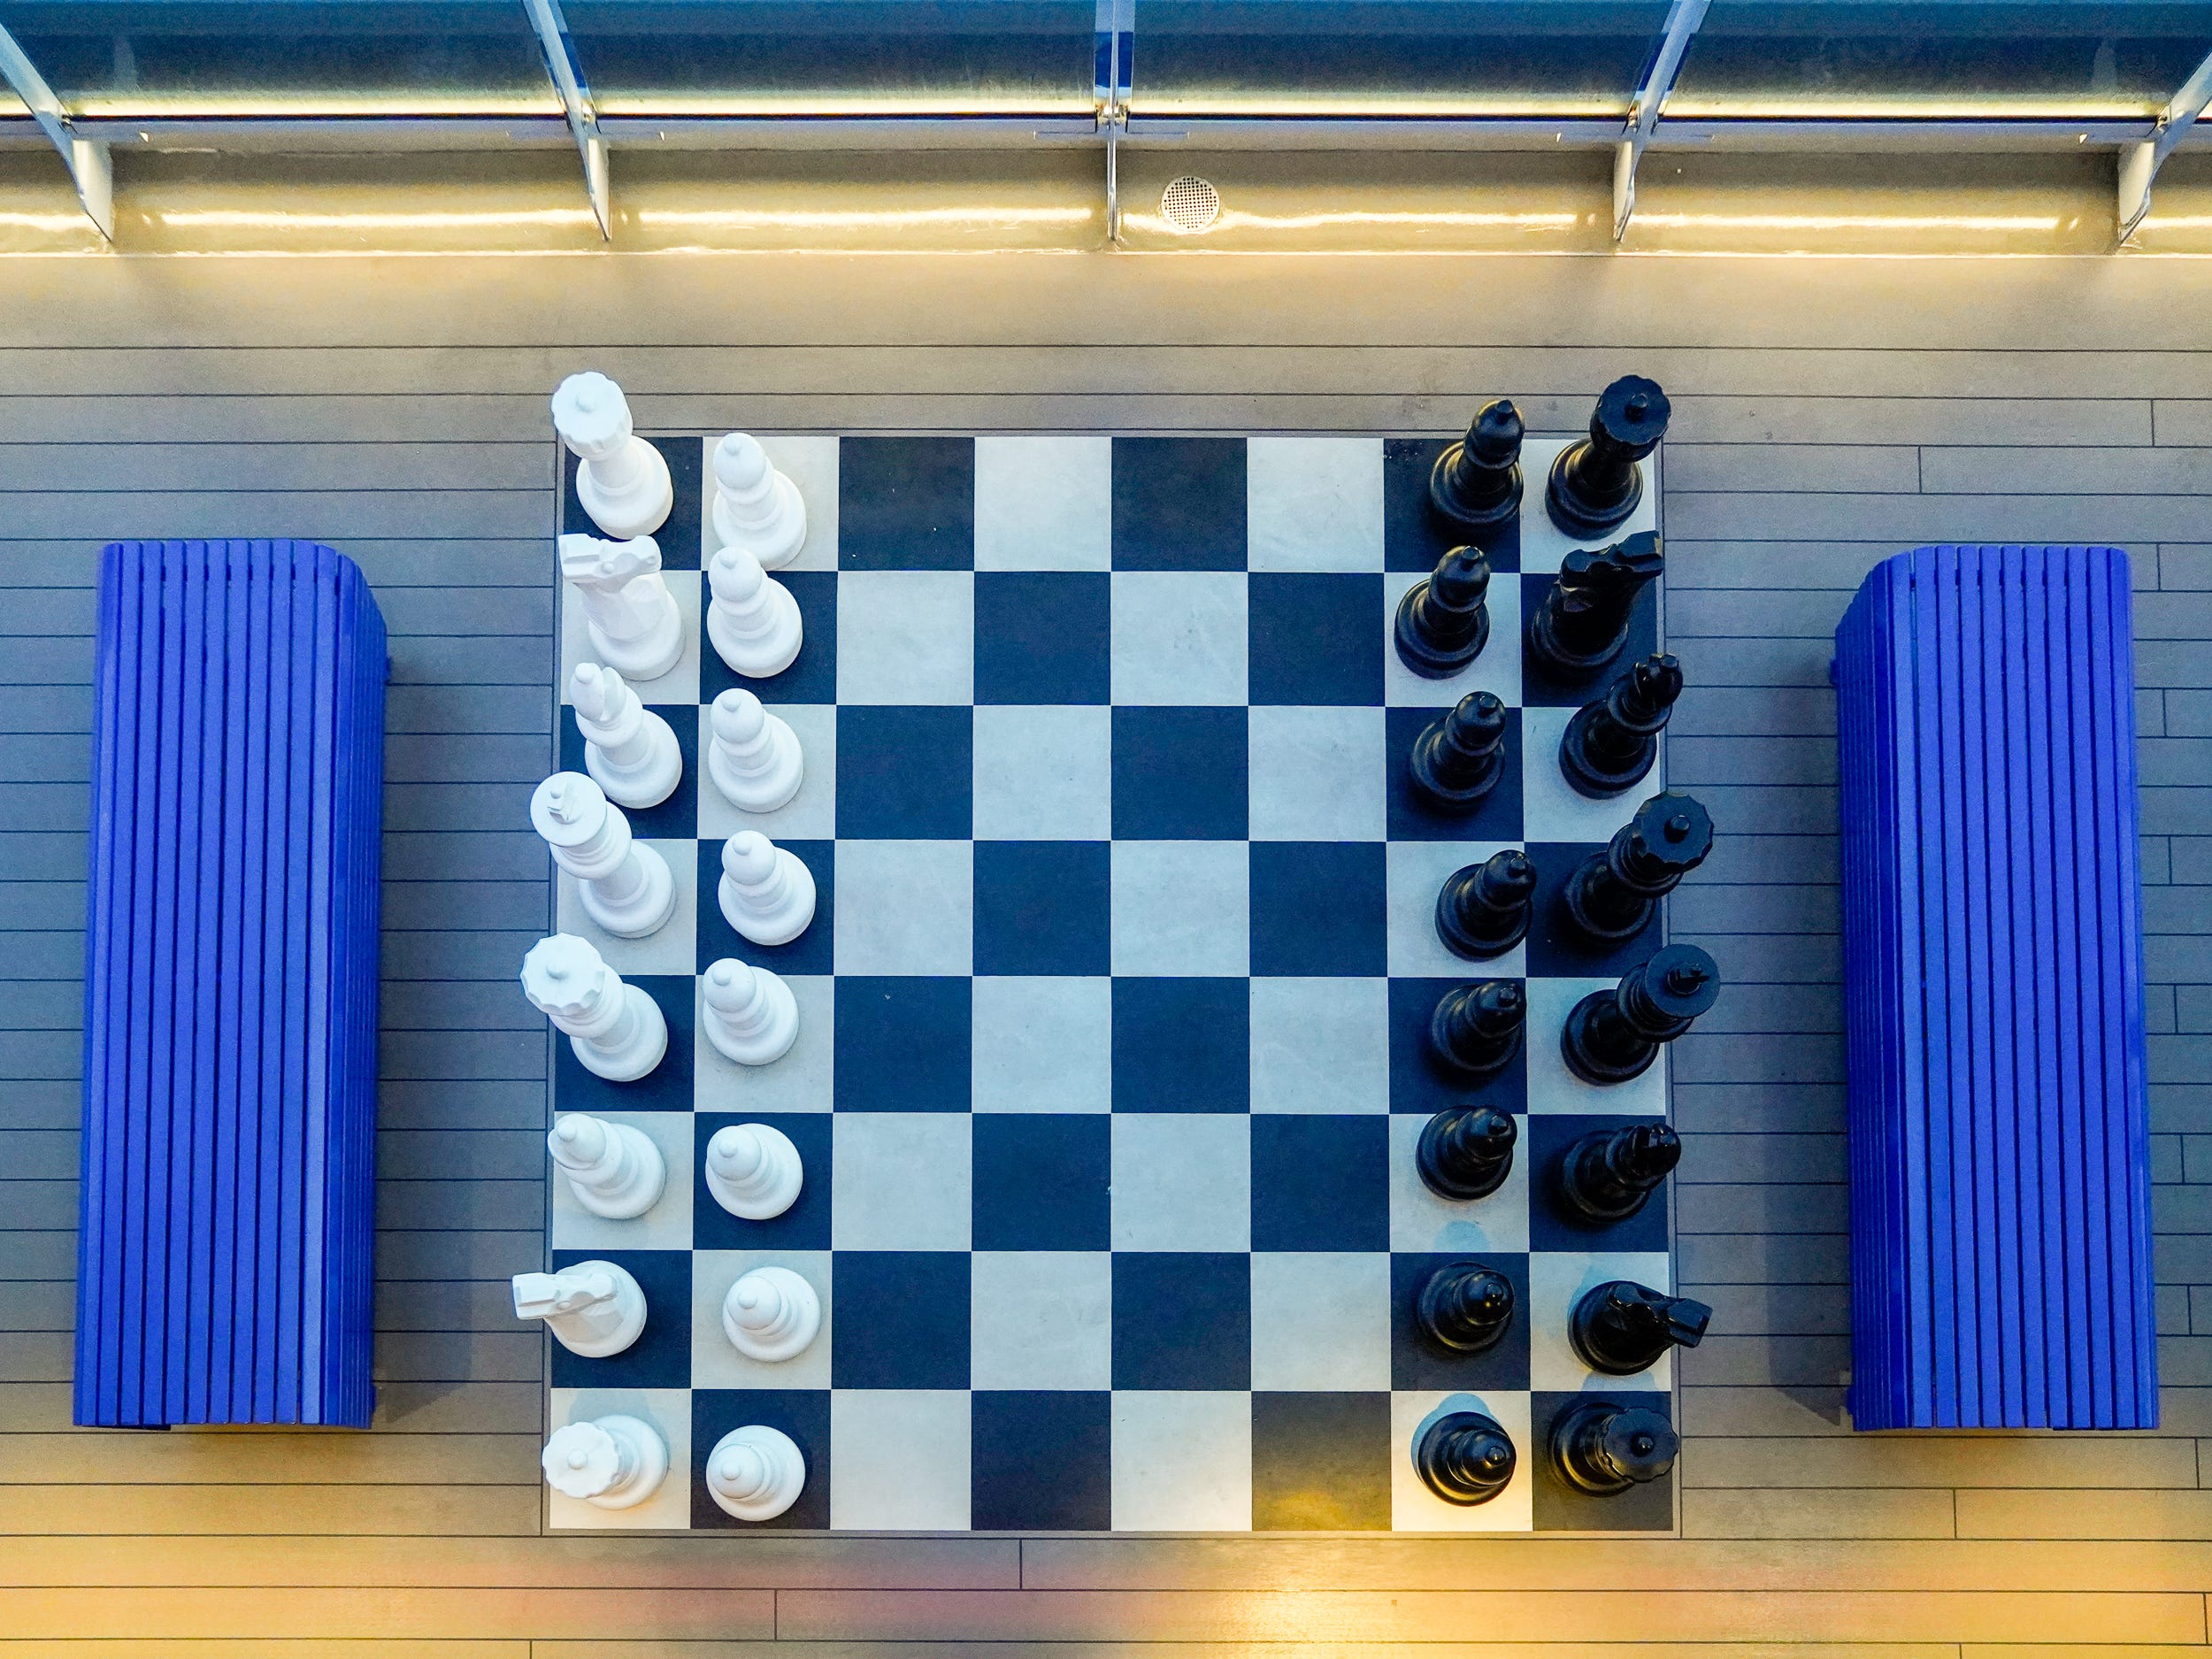 An aerial view of a large chess set between two blue benches on a cruise ship deck